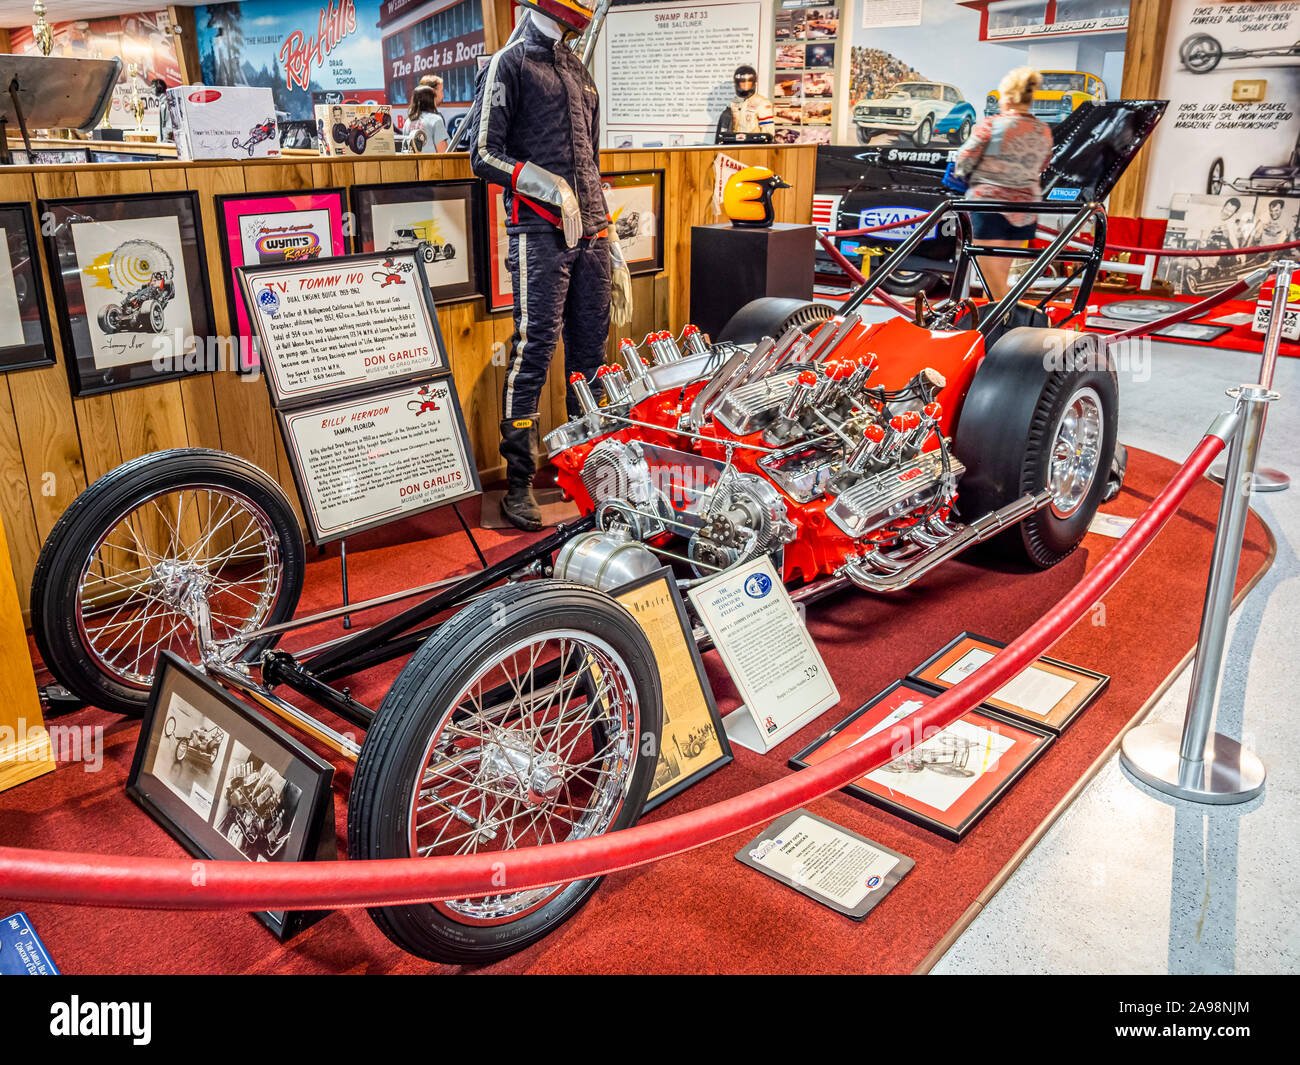 big-daddy-don-garlits-museum-of-drag-racing-in-ocala-florida-in-the-united-states-2A98NJM.jpg